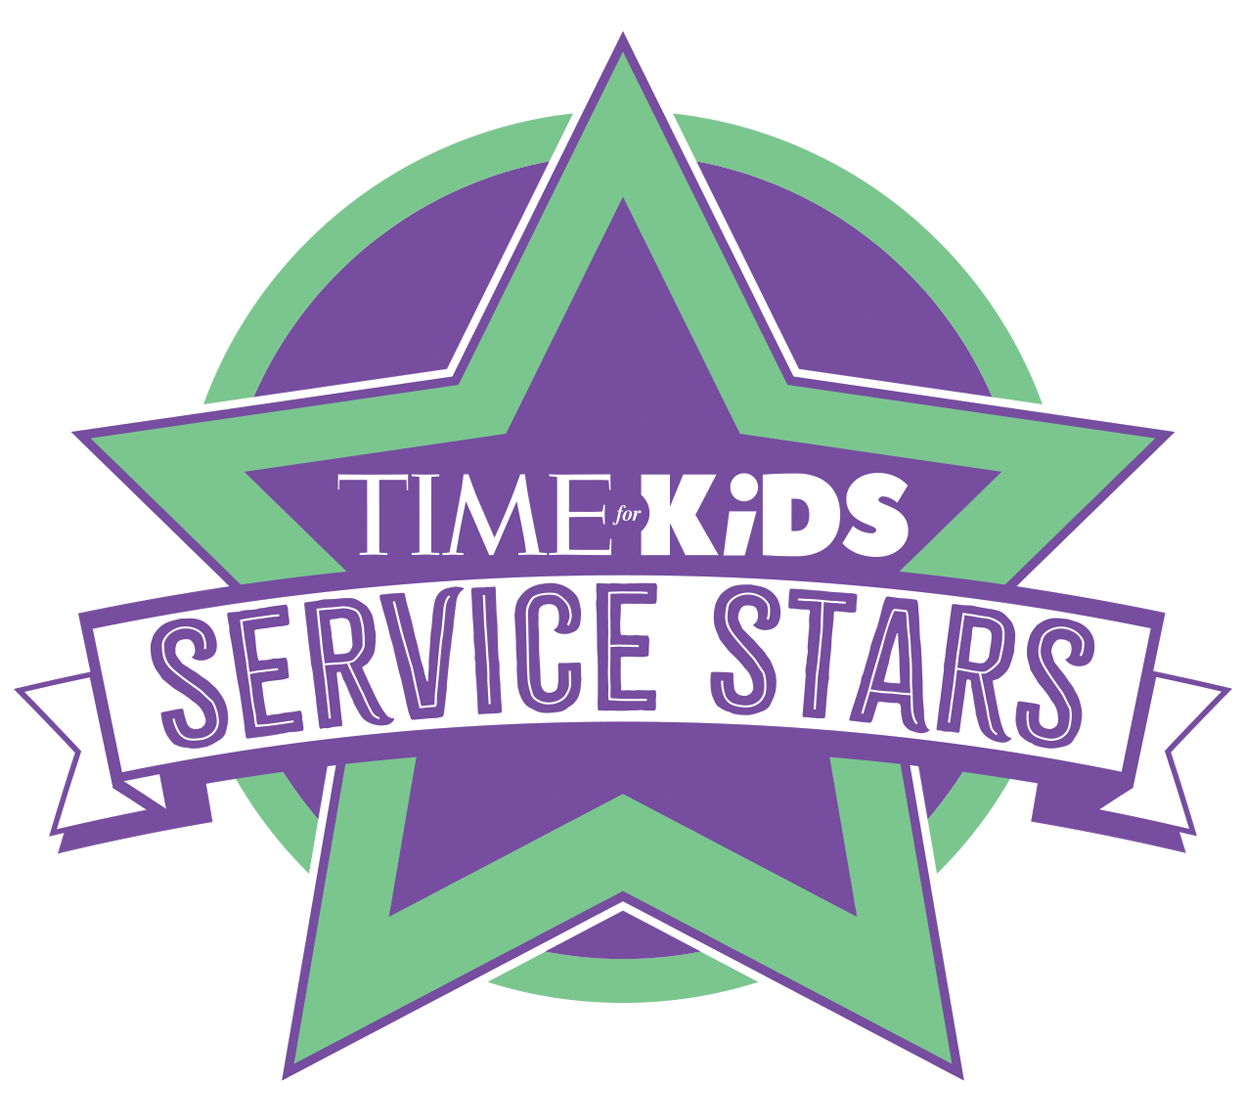 TIME for Kids Announces ‘Service Stars’
                      
                      
                        By TIME PR